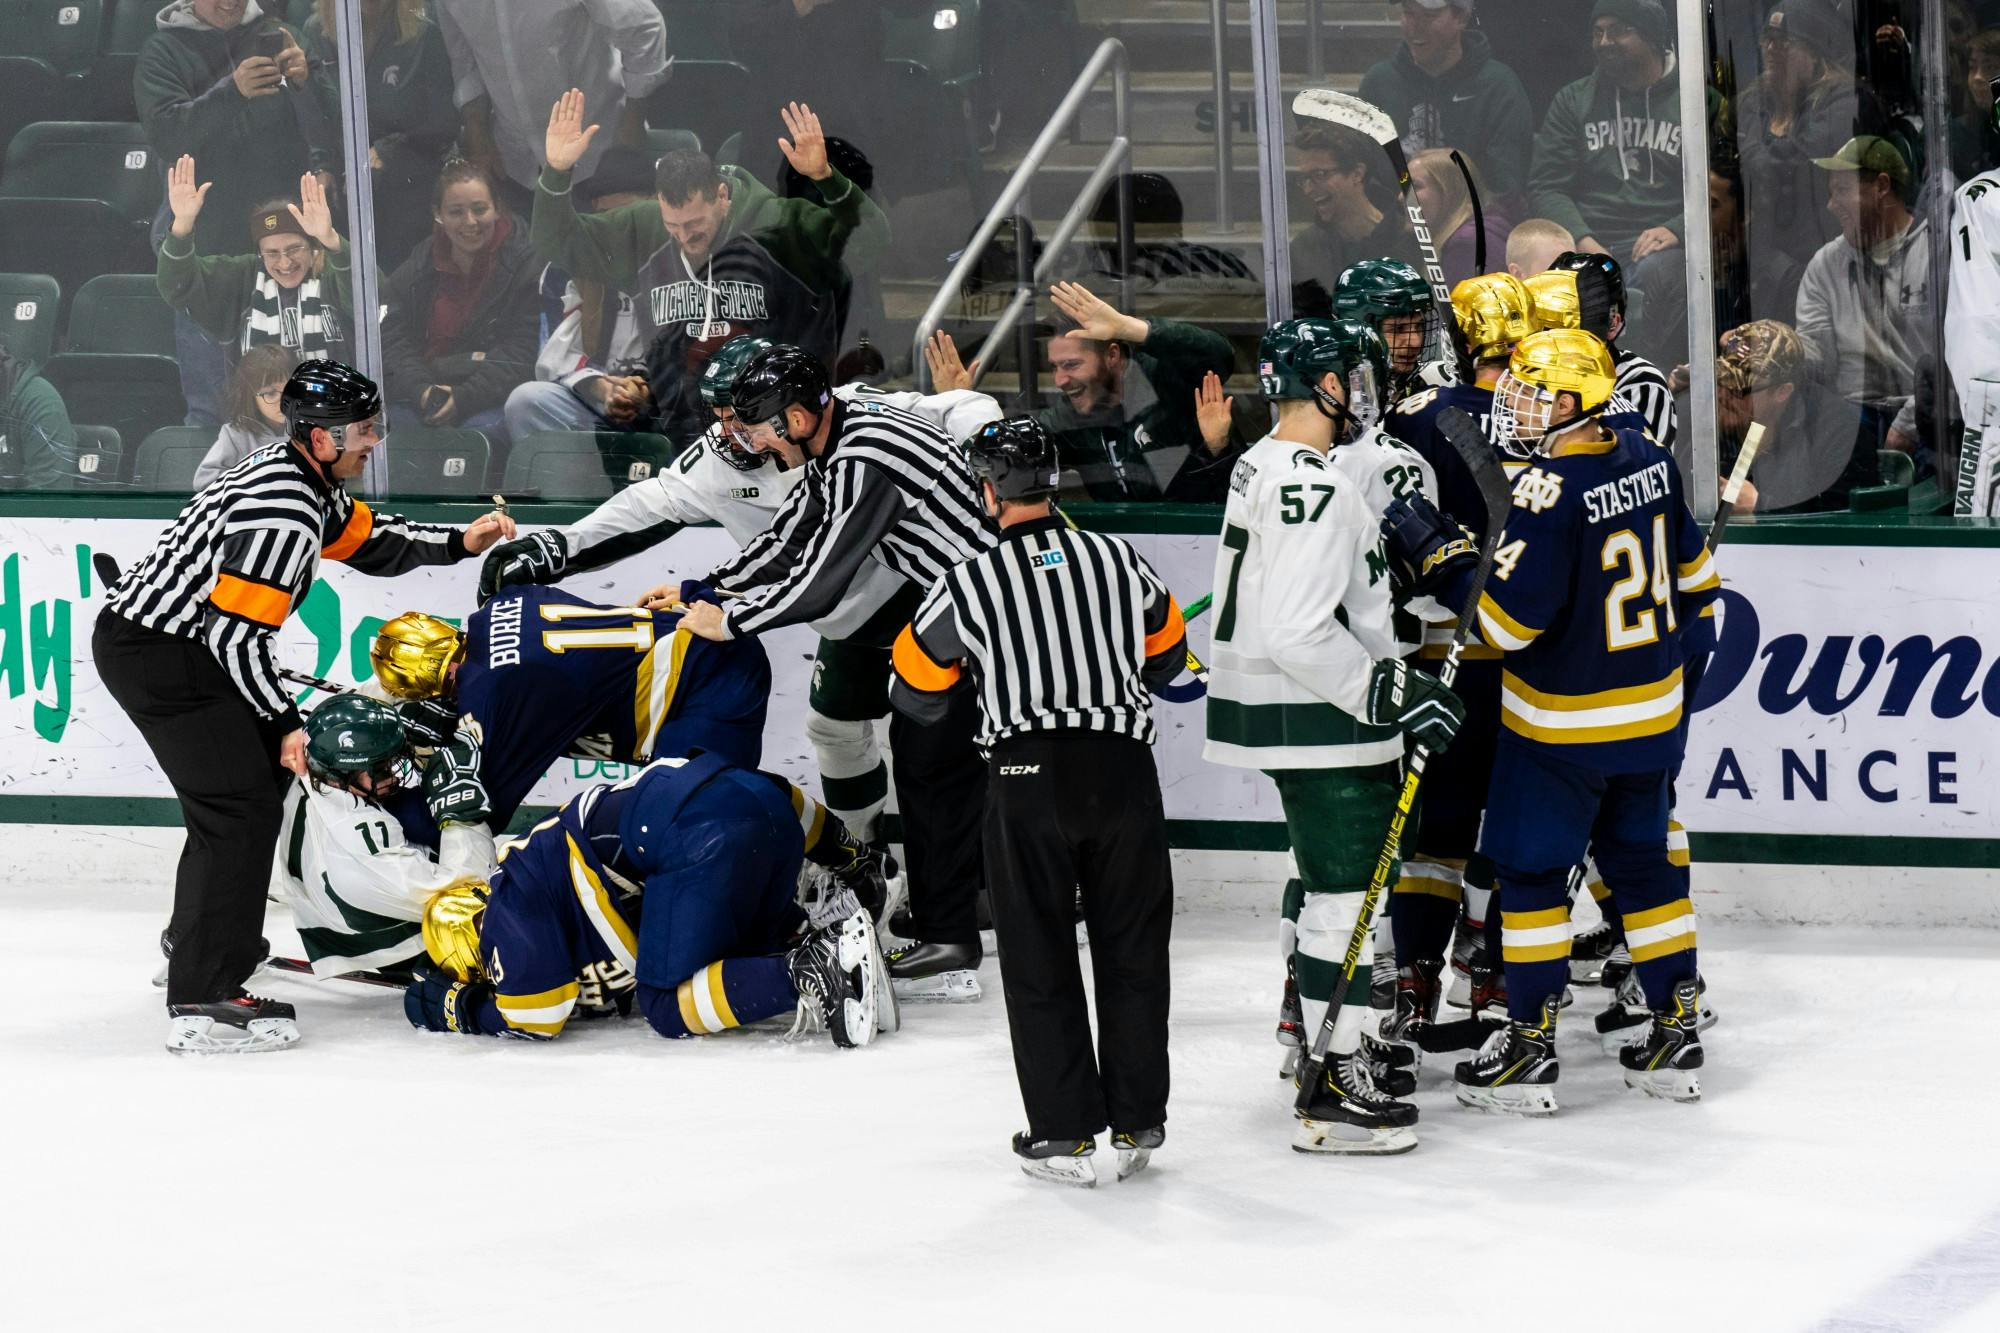 <p>Michigan State and Notre Dame players argue following a hit at the end of regulation. The Spartans tied with the Fighting Irish, 1-1, at Munn Ice Arena on Nov. 22, 2019. </p>